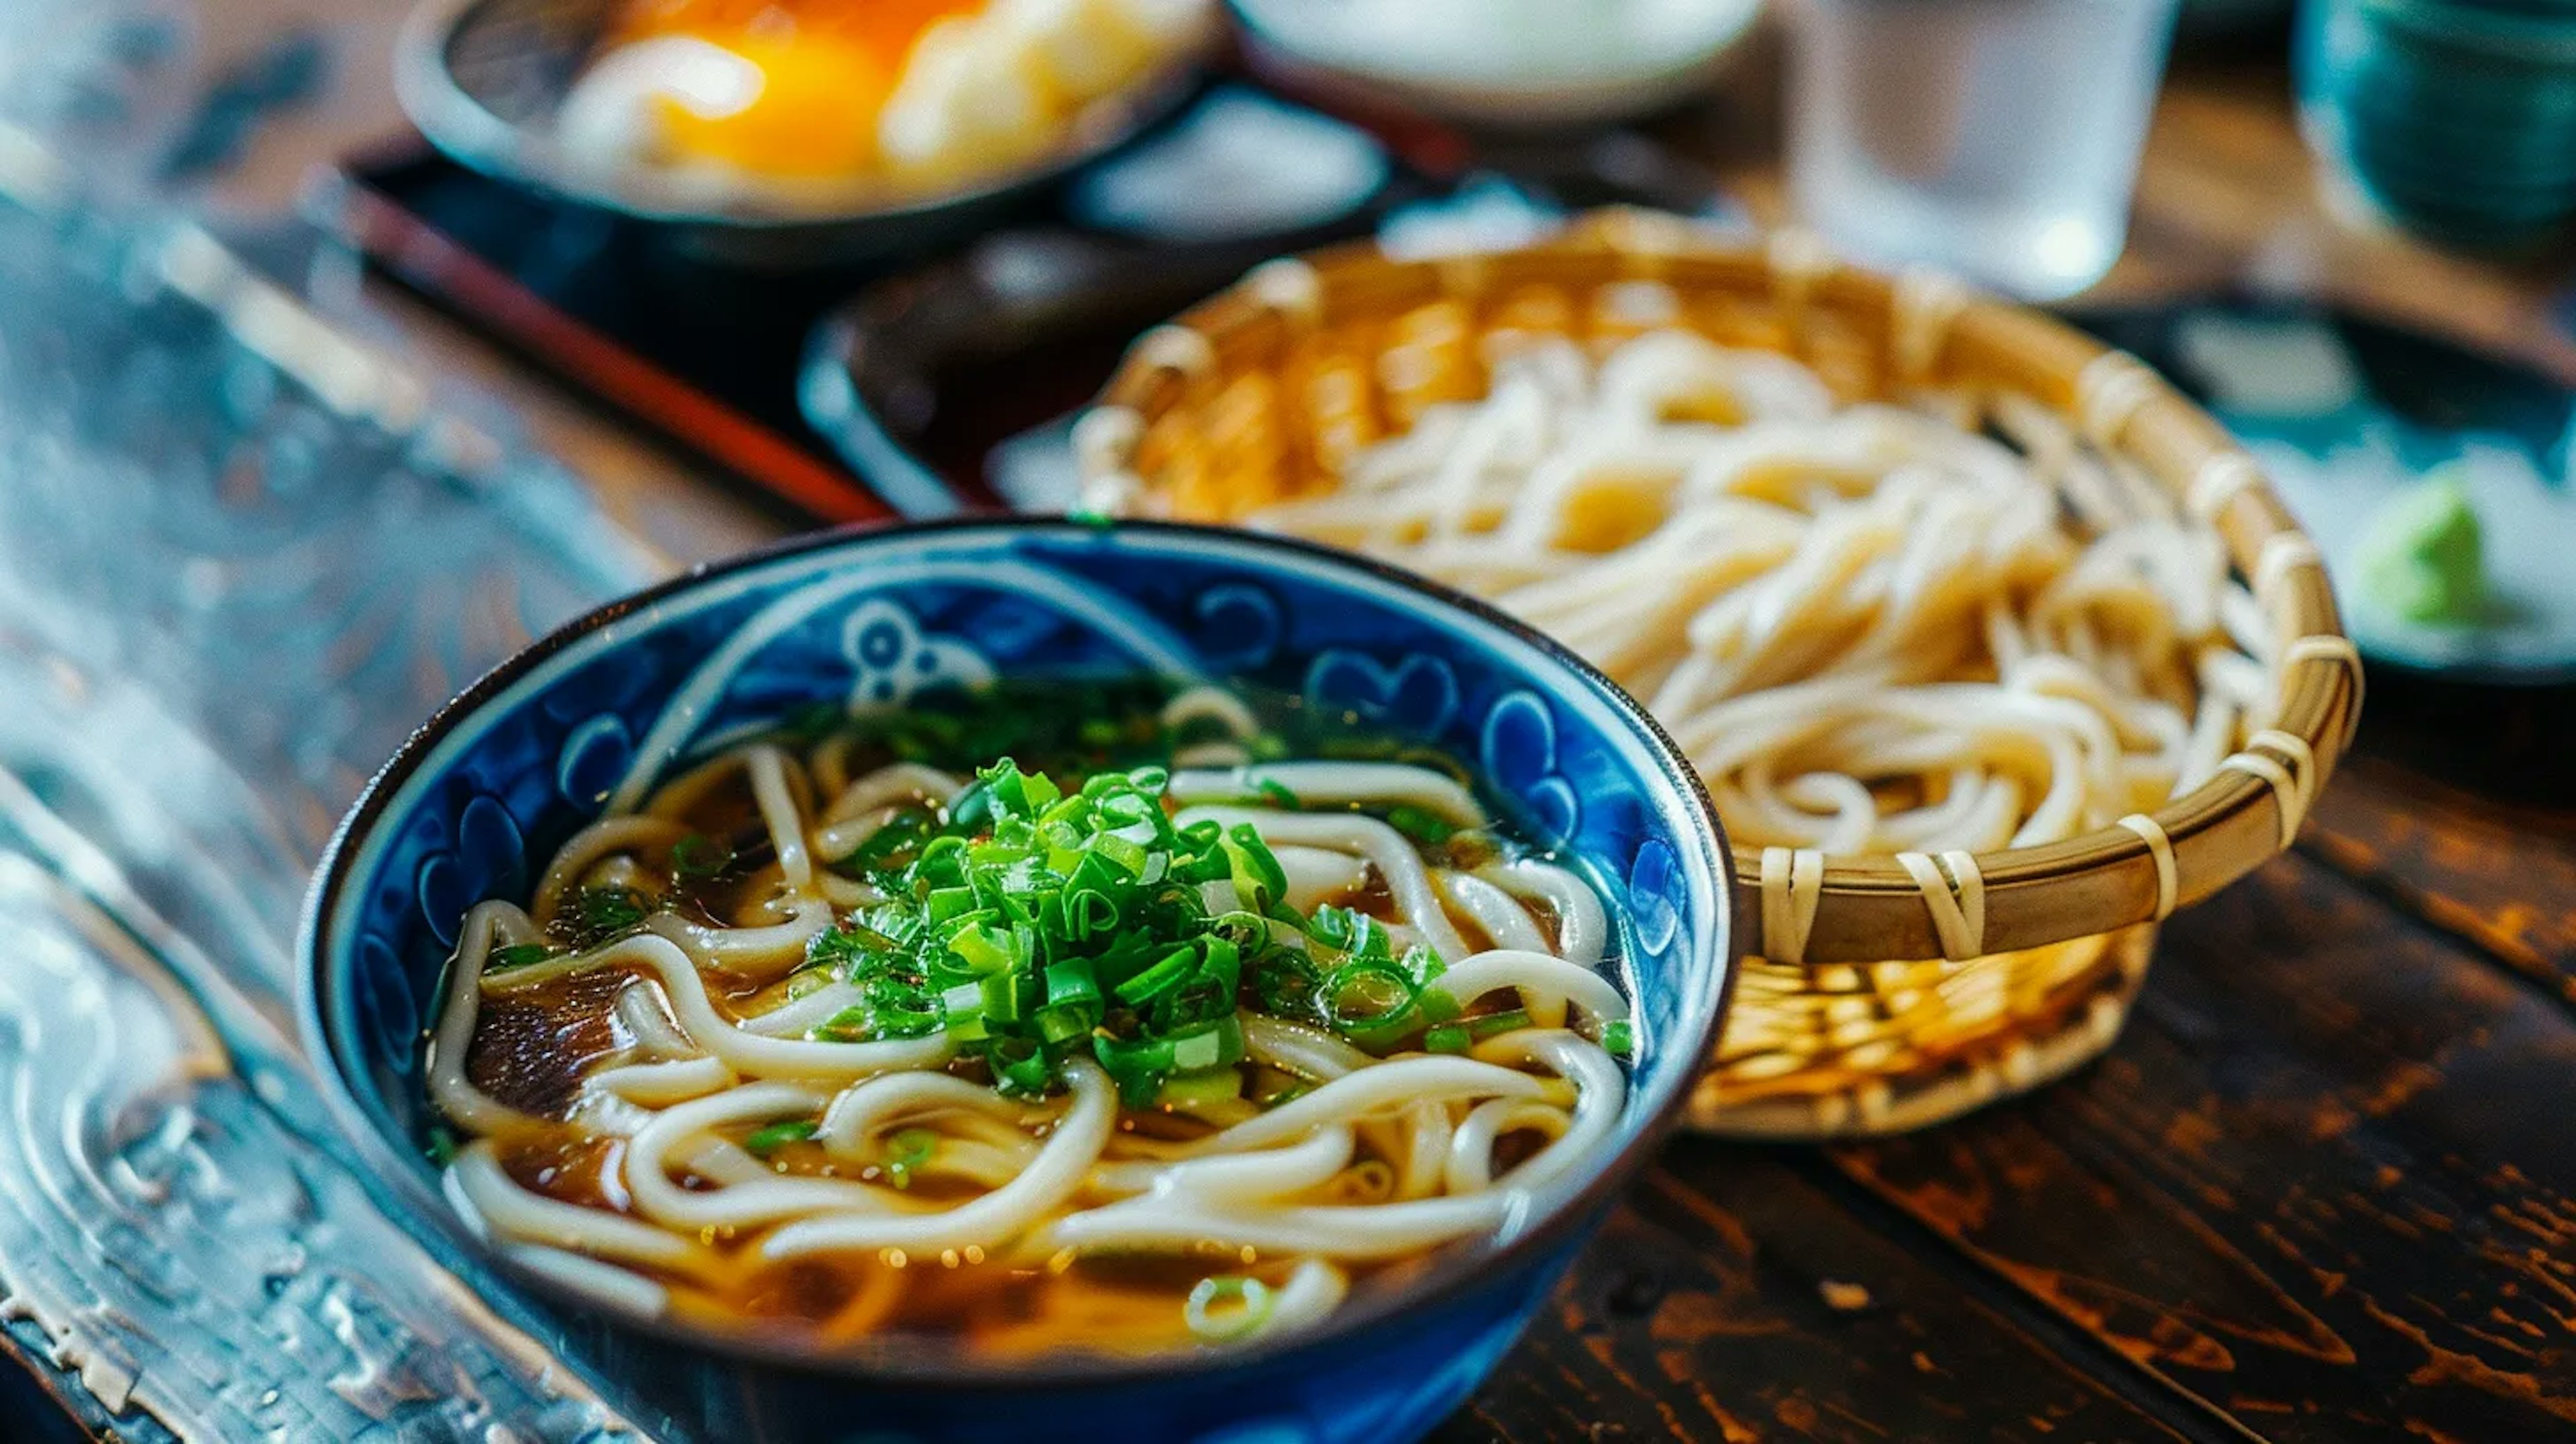 Udon vs. Soba comparison, showcasing thick udon noodles in broth and cold soba noodles